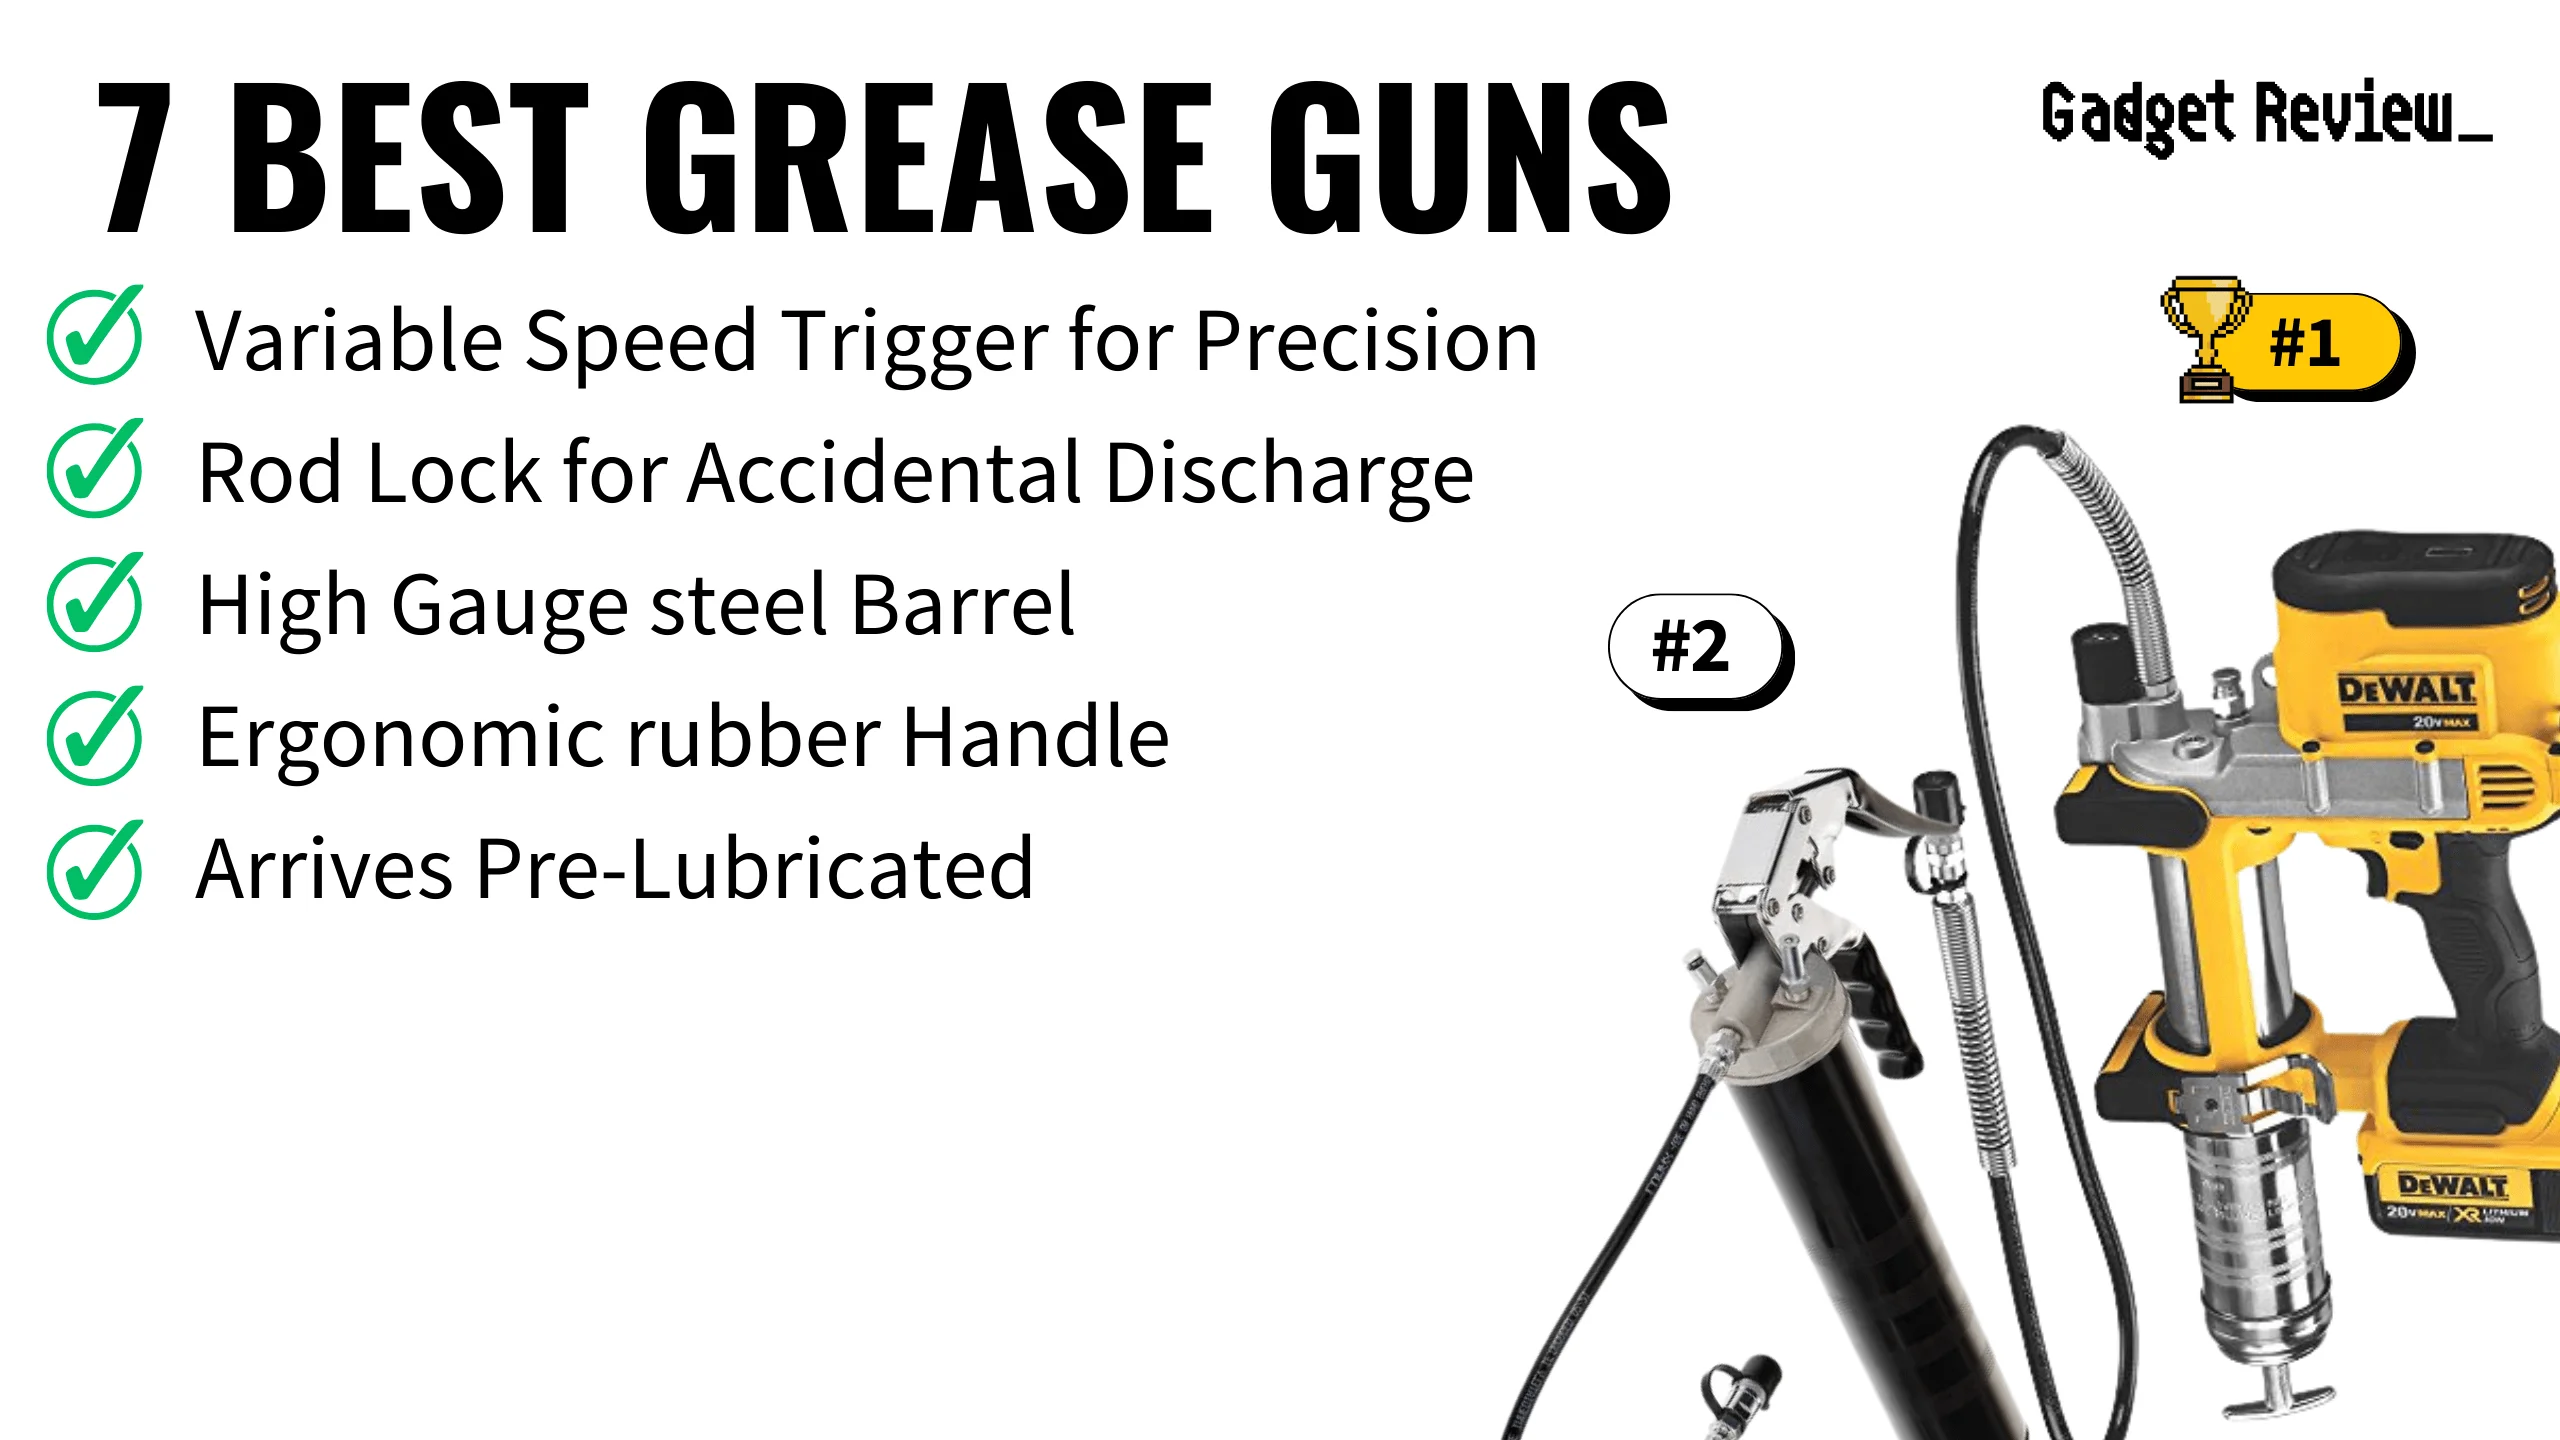 best grease gun featured image that shows the top three best tool models